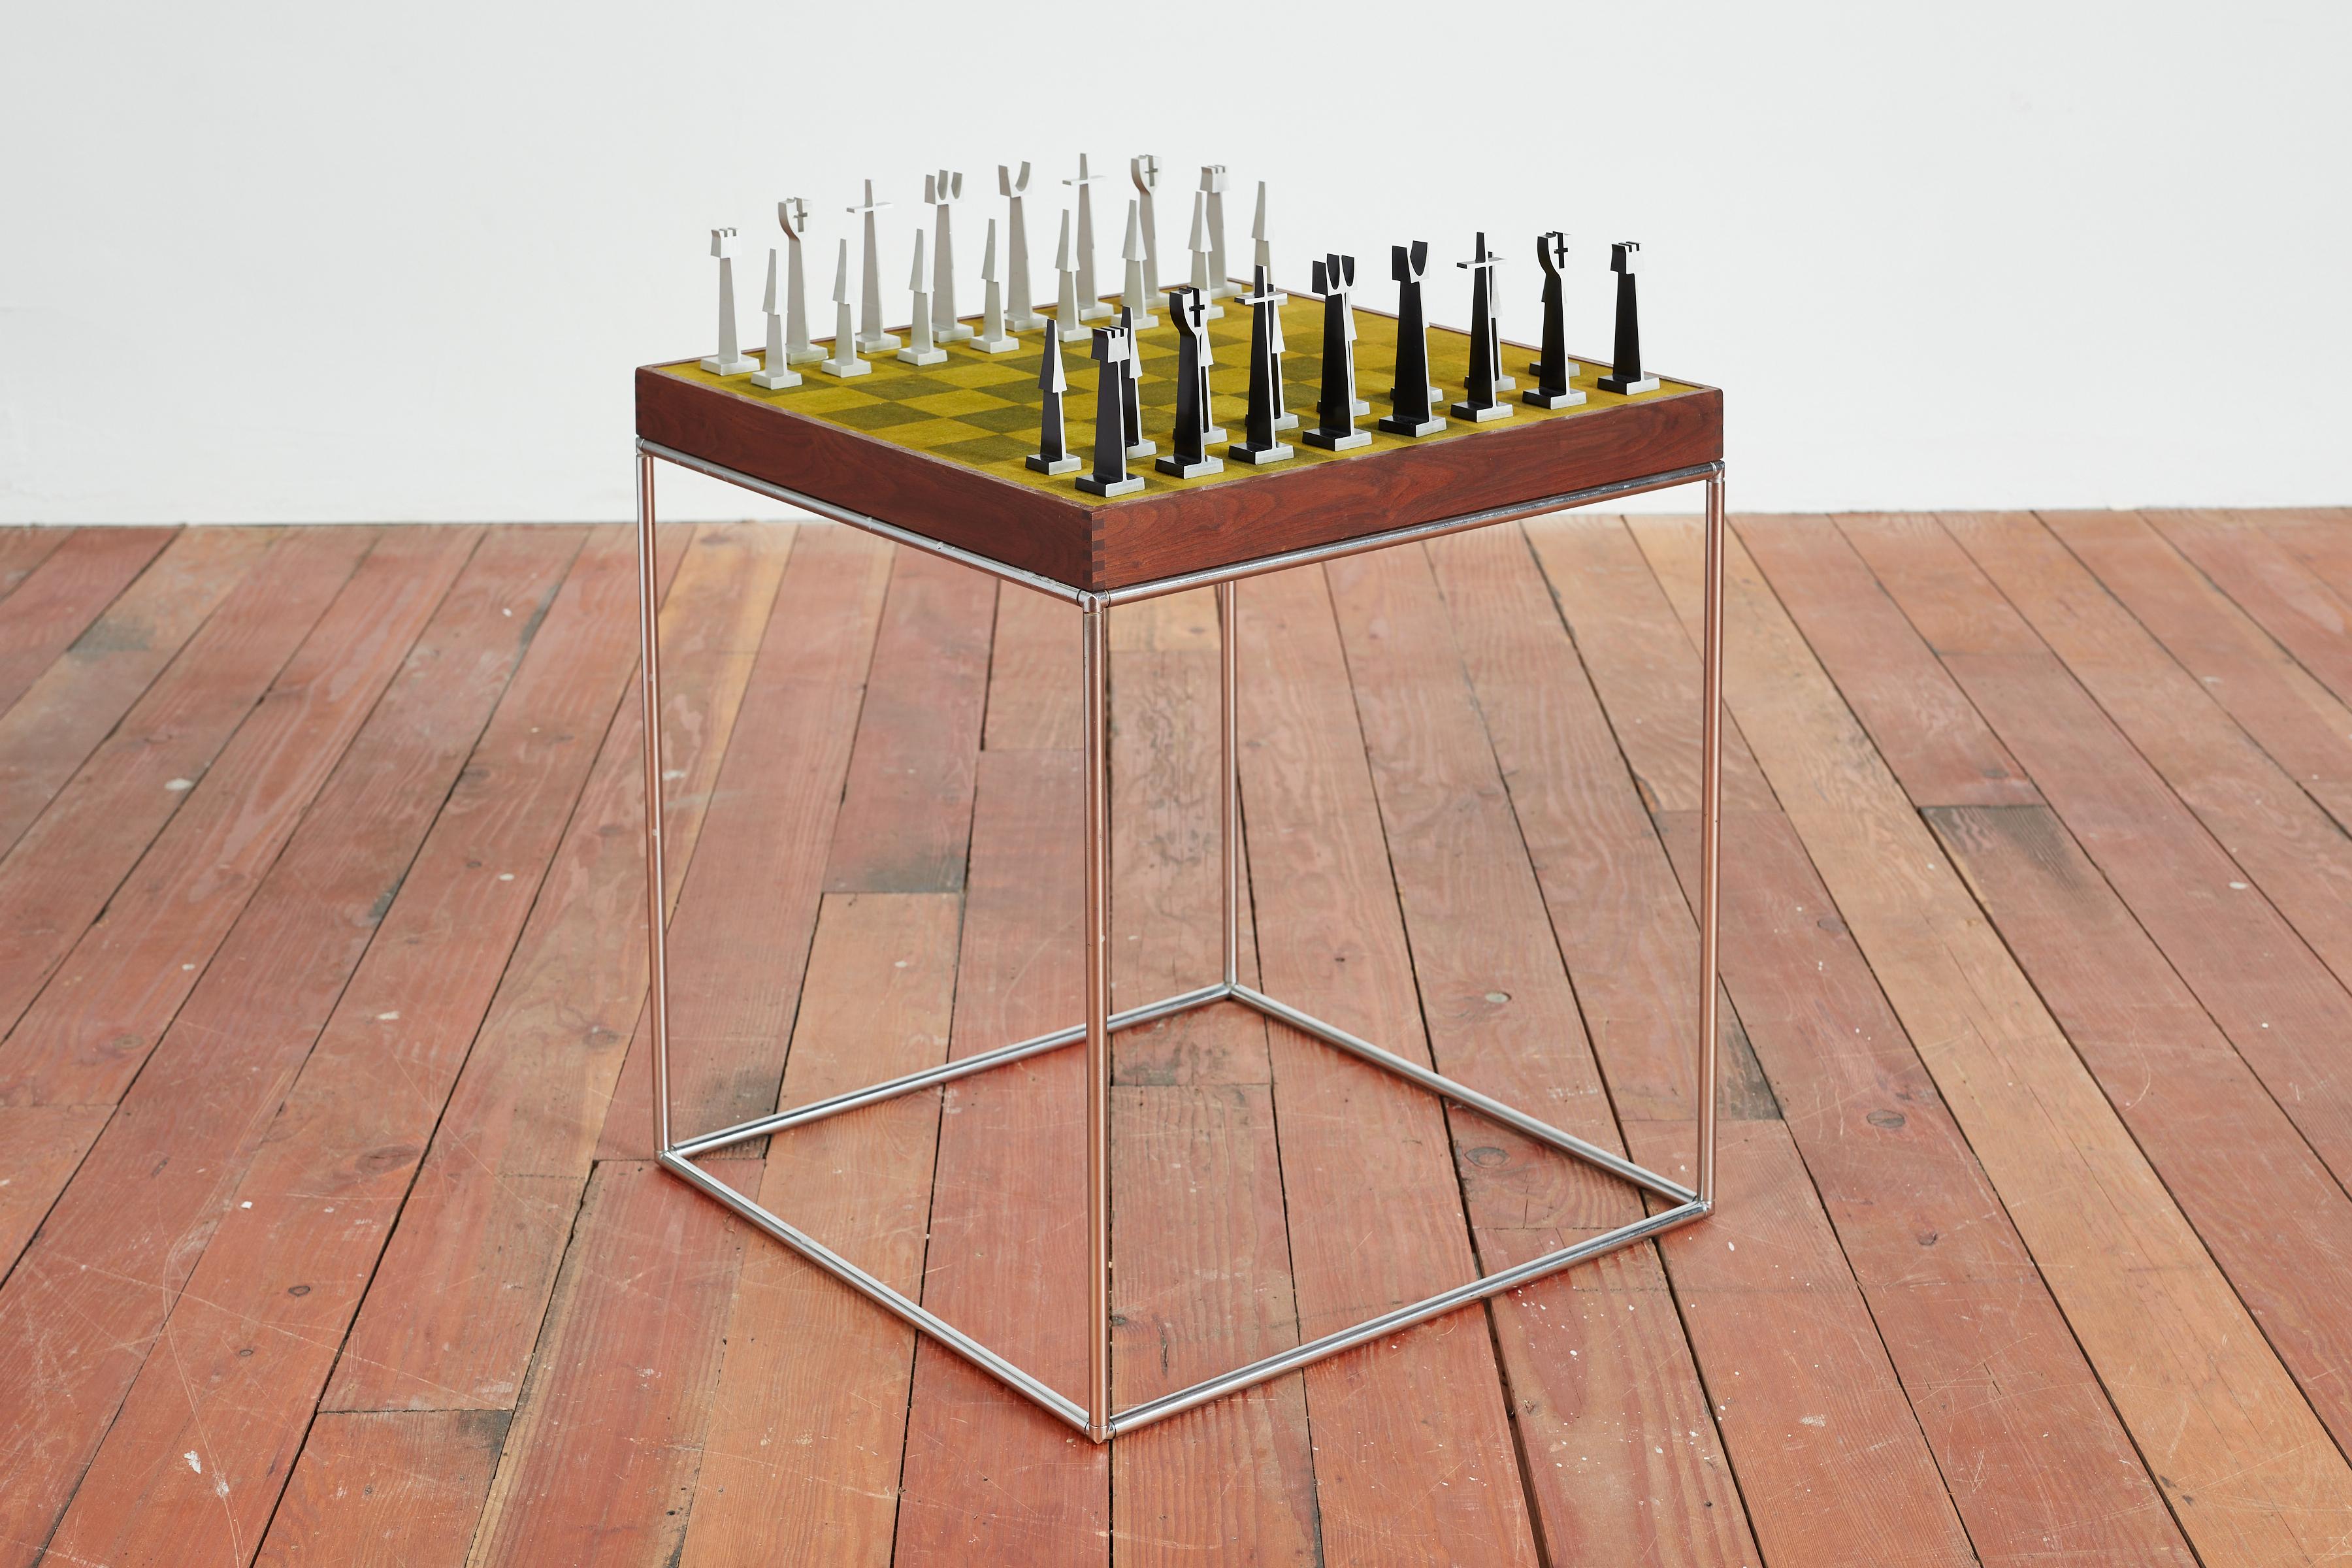 A rare Austin Cox chess set on chrome base with walnut trim and printed green velvet board -  by Austin Cox. 
Set comes with original box with wonderful vintage aluminum chess pieces 
1966, Austin Enterprises 
Each piece and table marked 

Table: